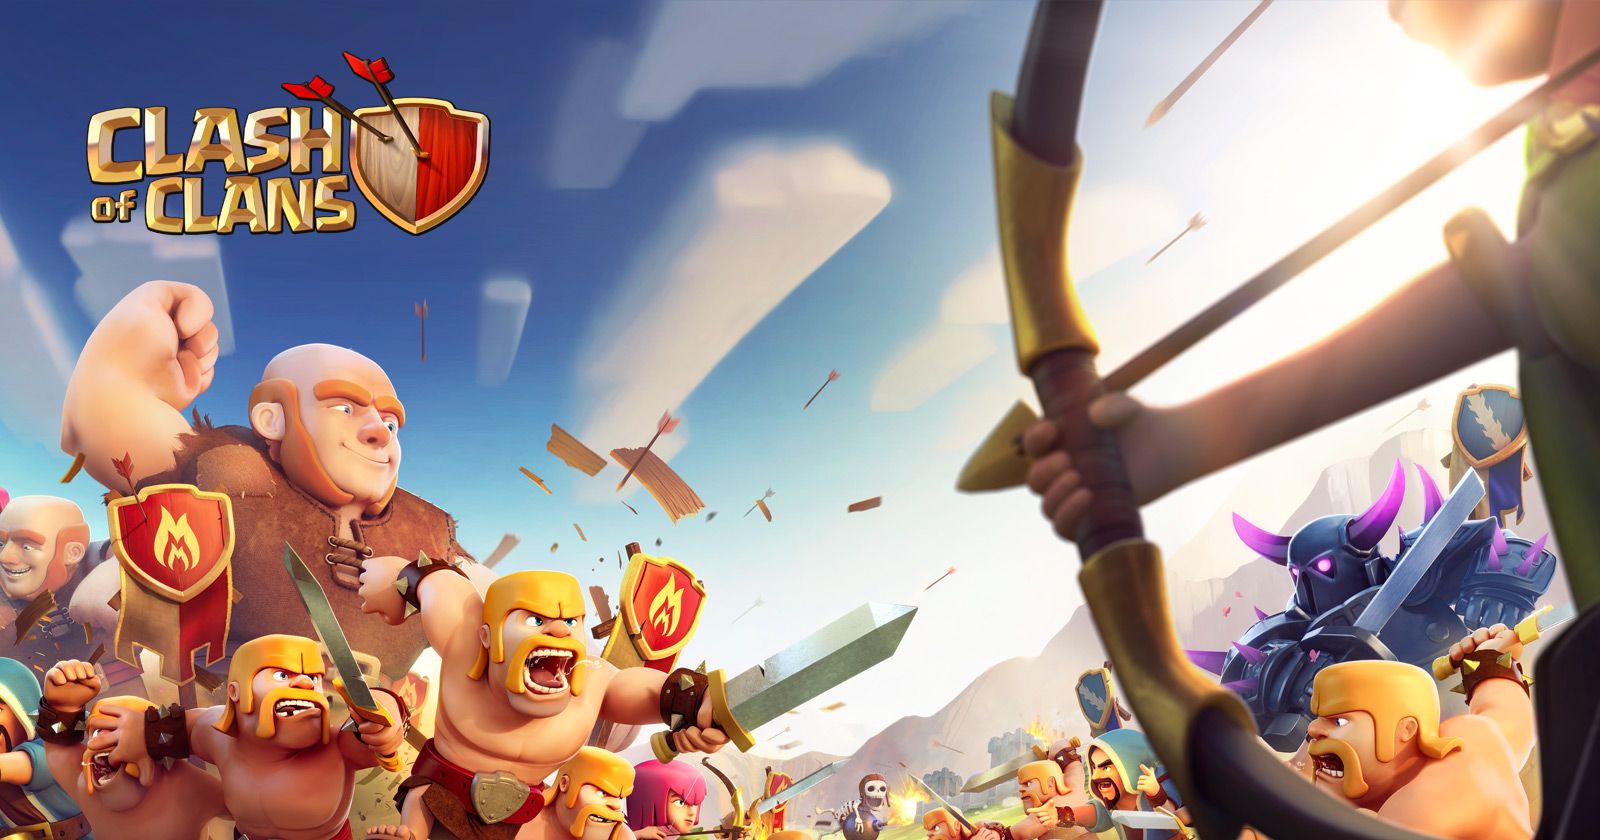 Clash of Clans update today